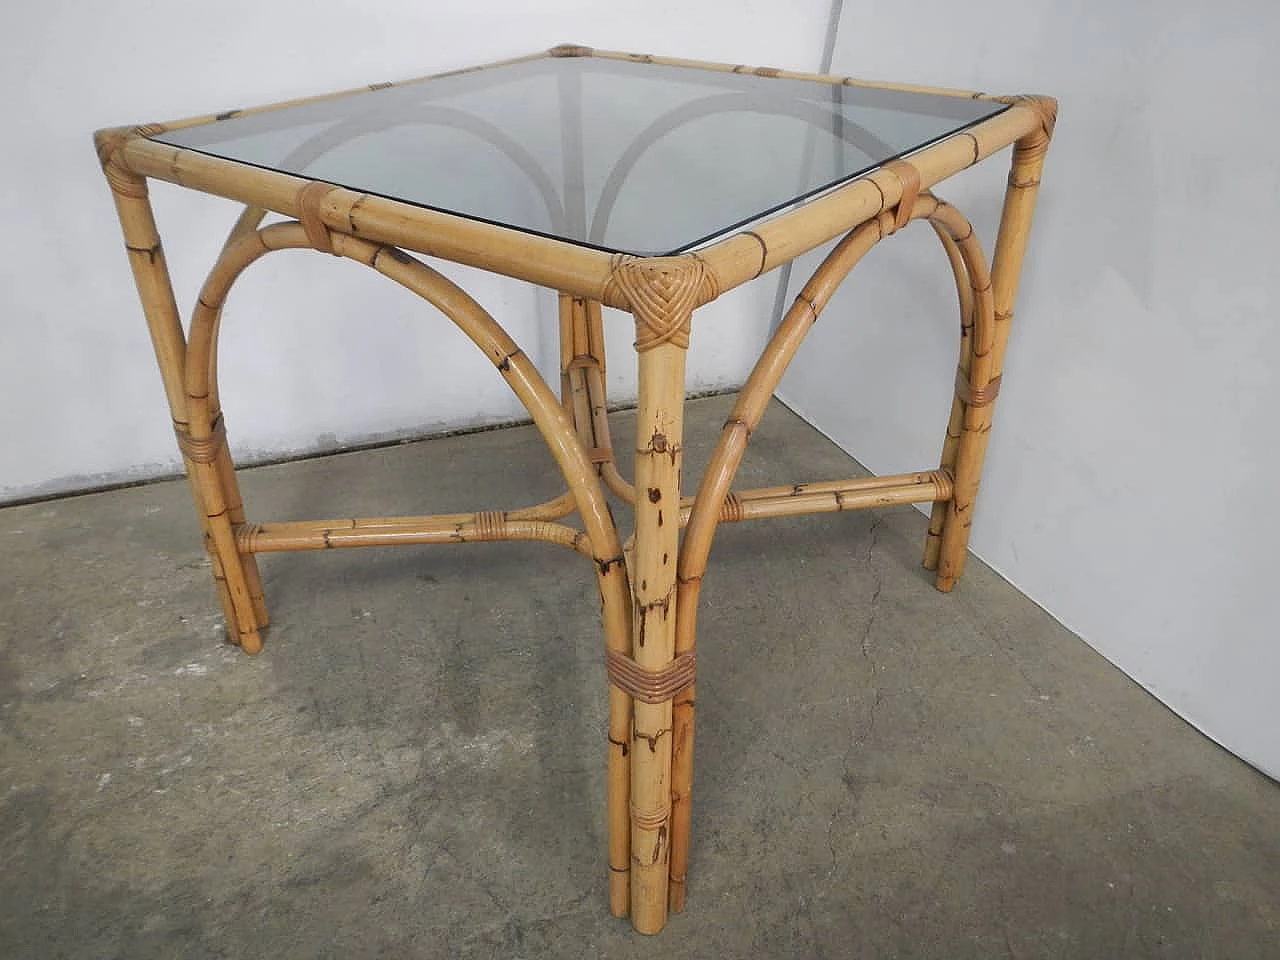 Wicker table with glass top, 1970s 1180660